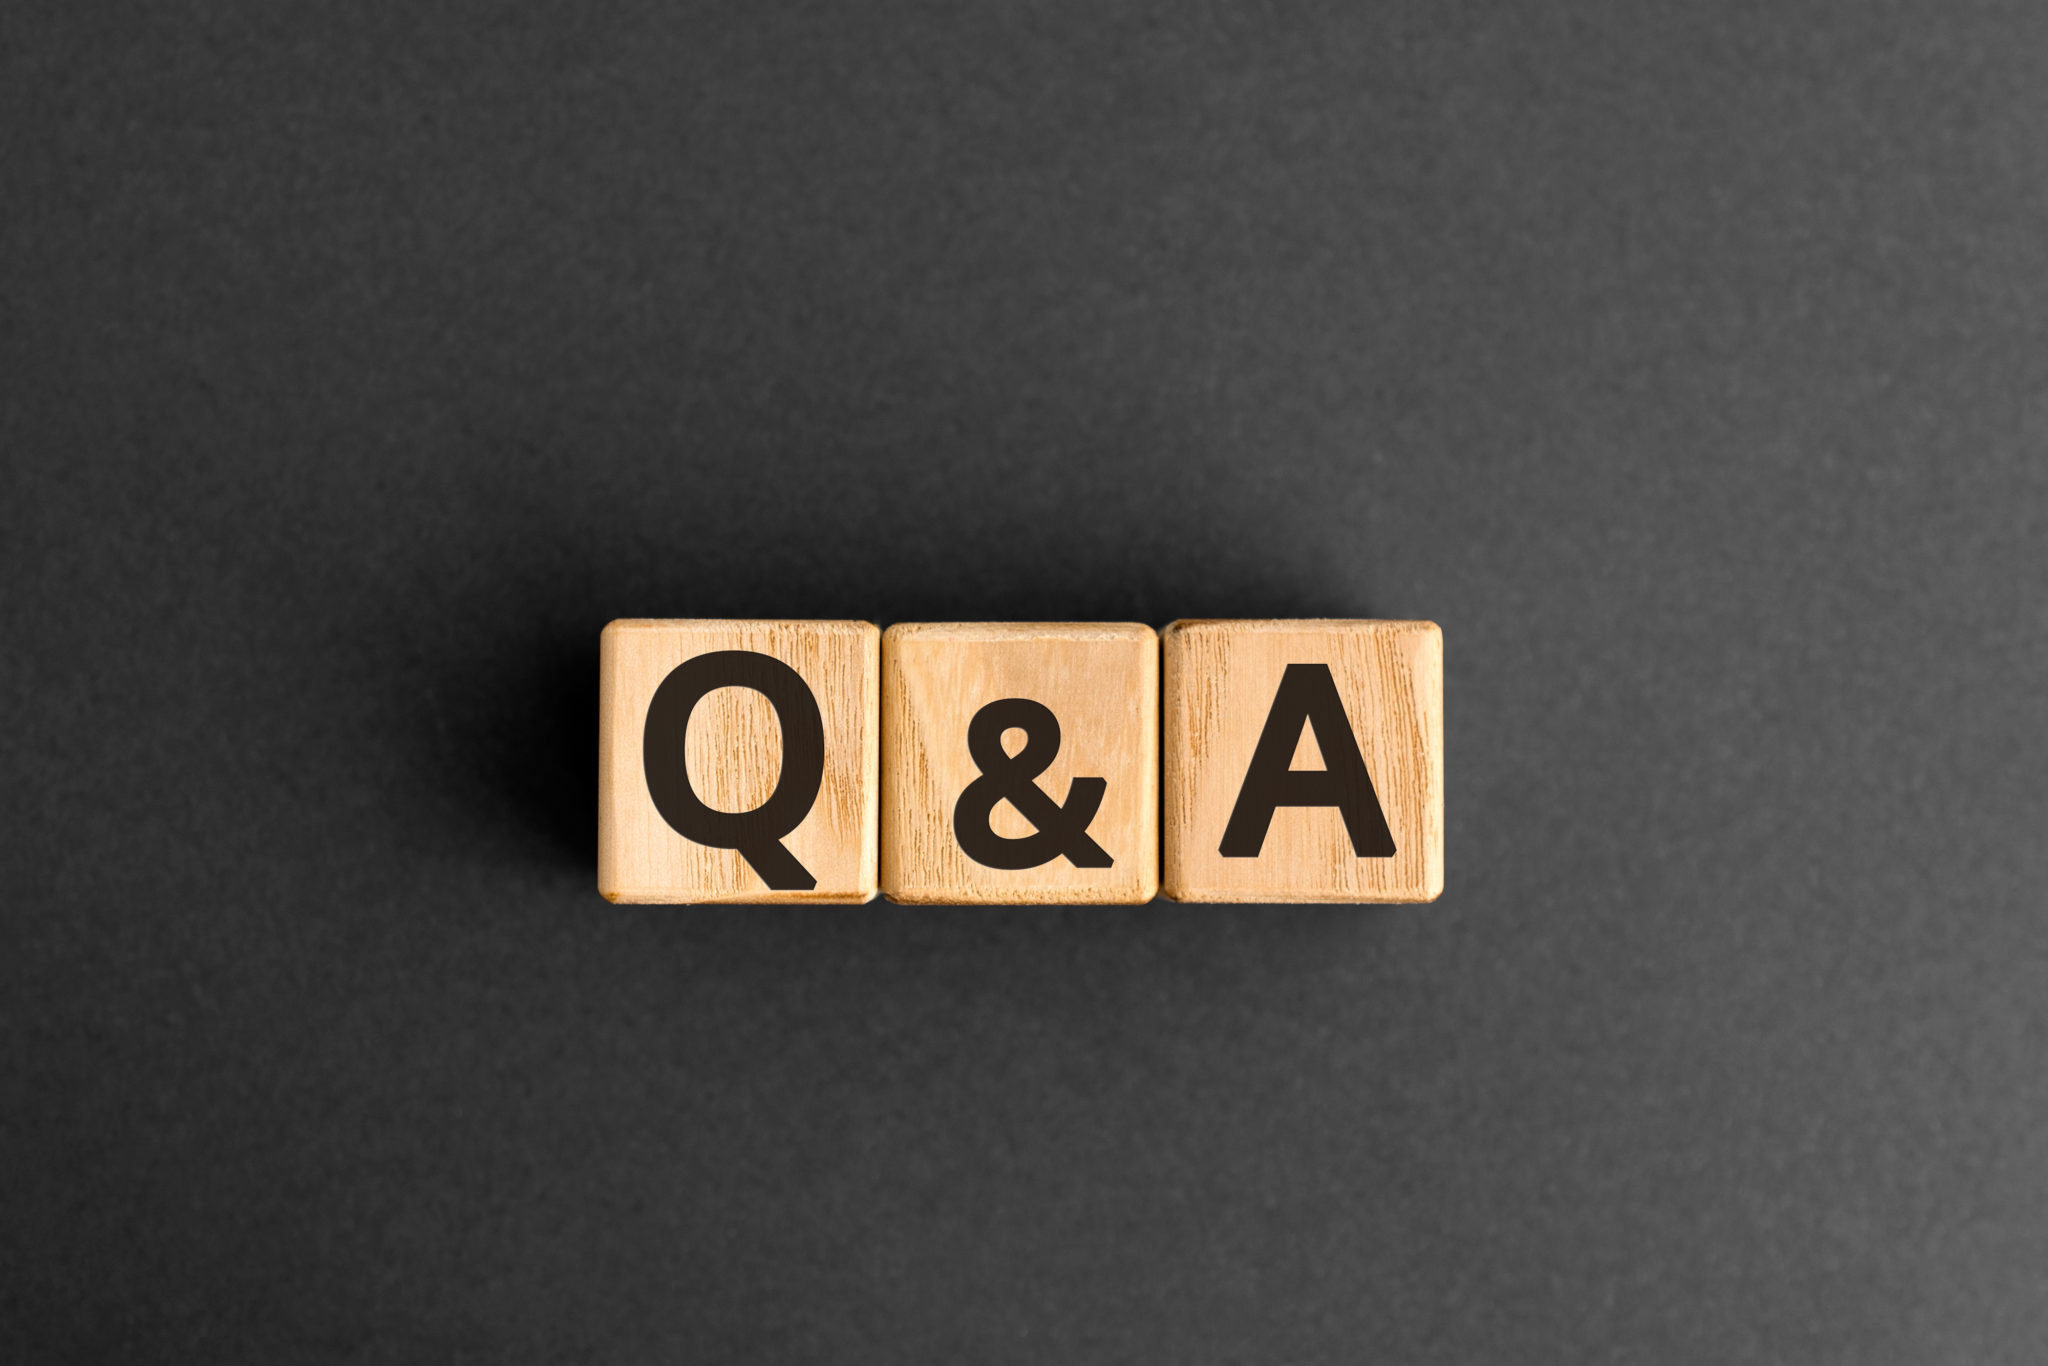 Q&a,-,Acronym,From,Wooden,Blocks,With,Letters,,Questions,And